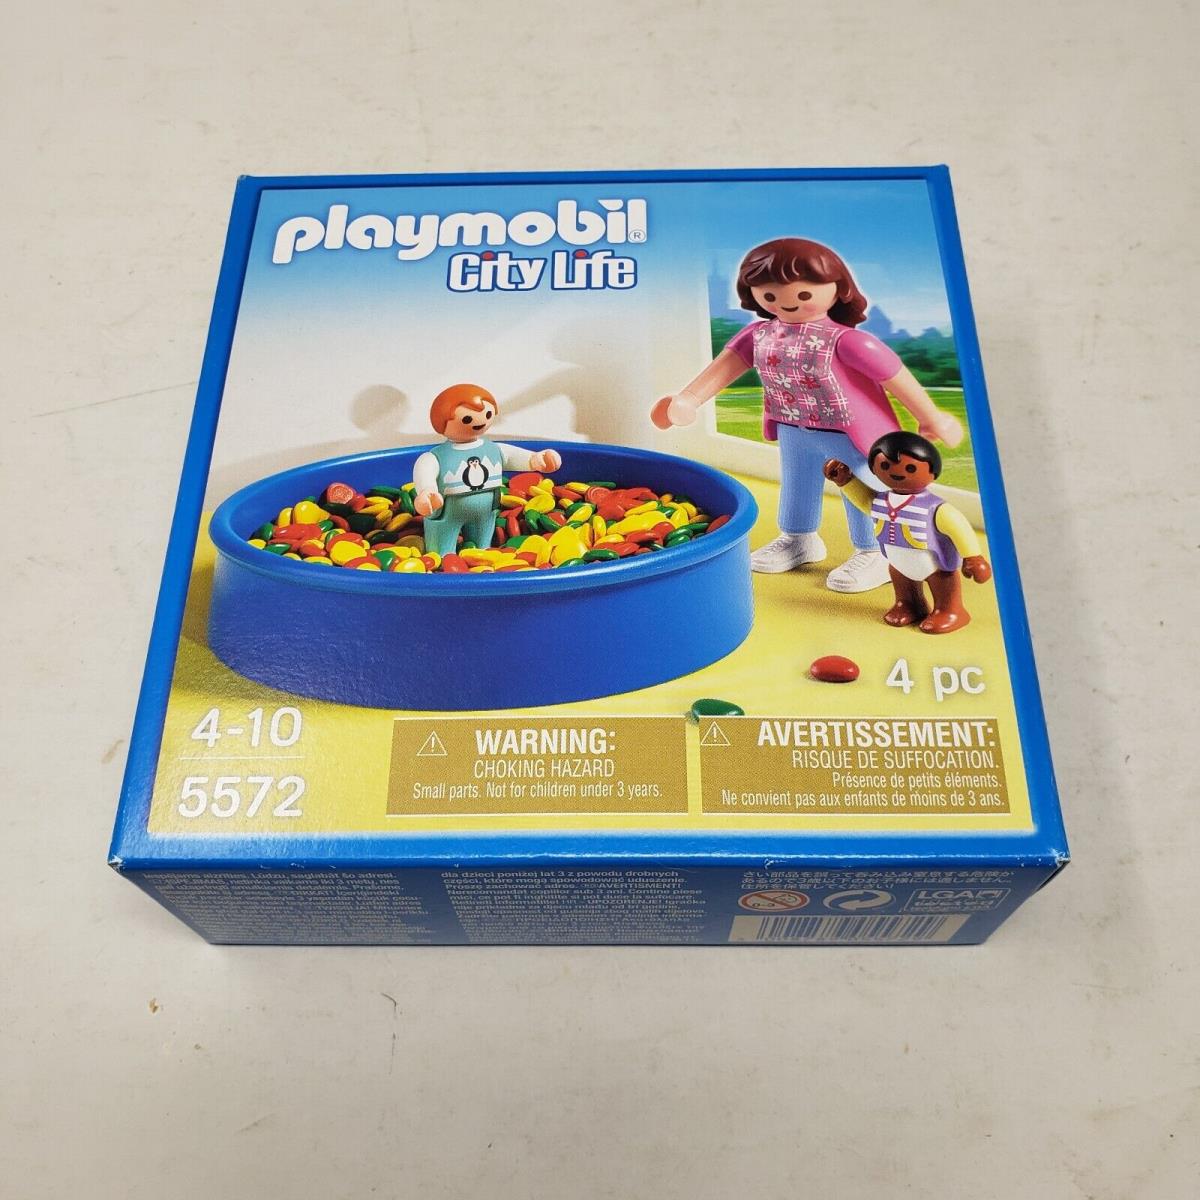 Playmobil City Life 5572 Preschool Daycare Toddler Ball Pit Toy 2014